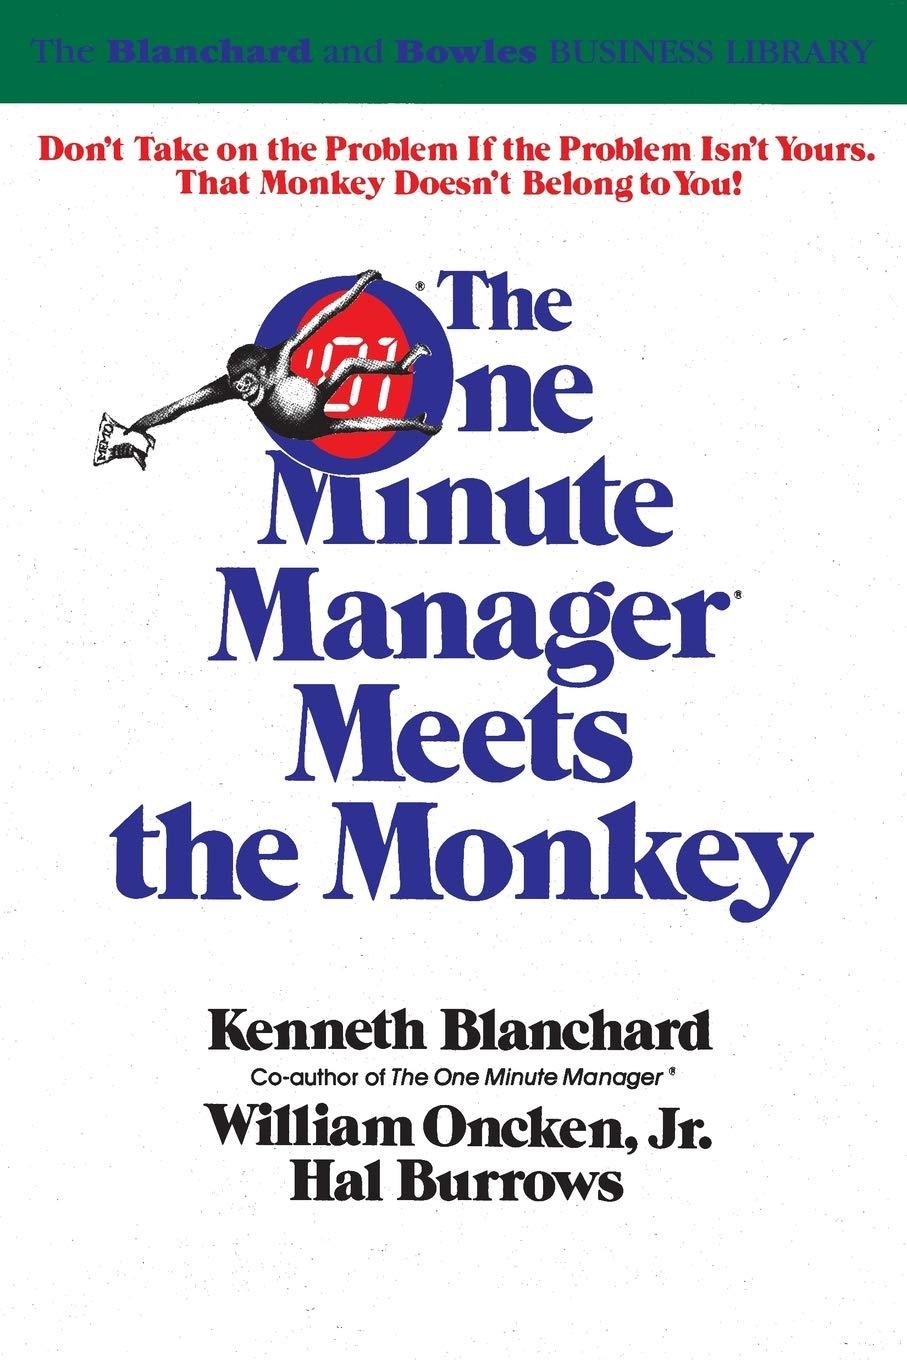 the one minute manager meets the monkey 1st edition ken blanchard, william oncken, hal burrows 0688103804,